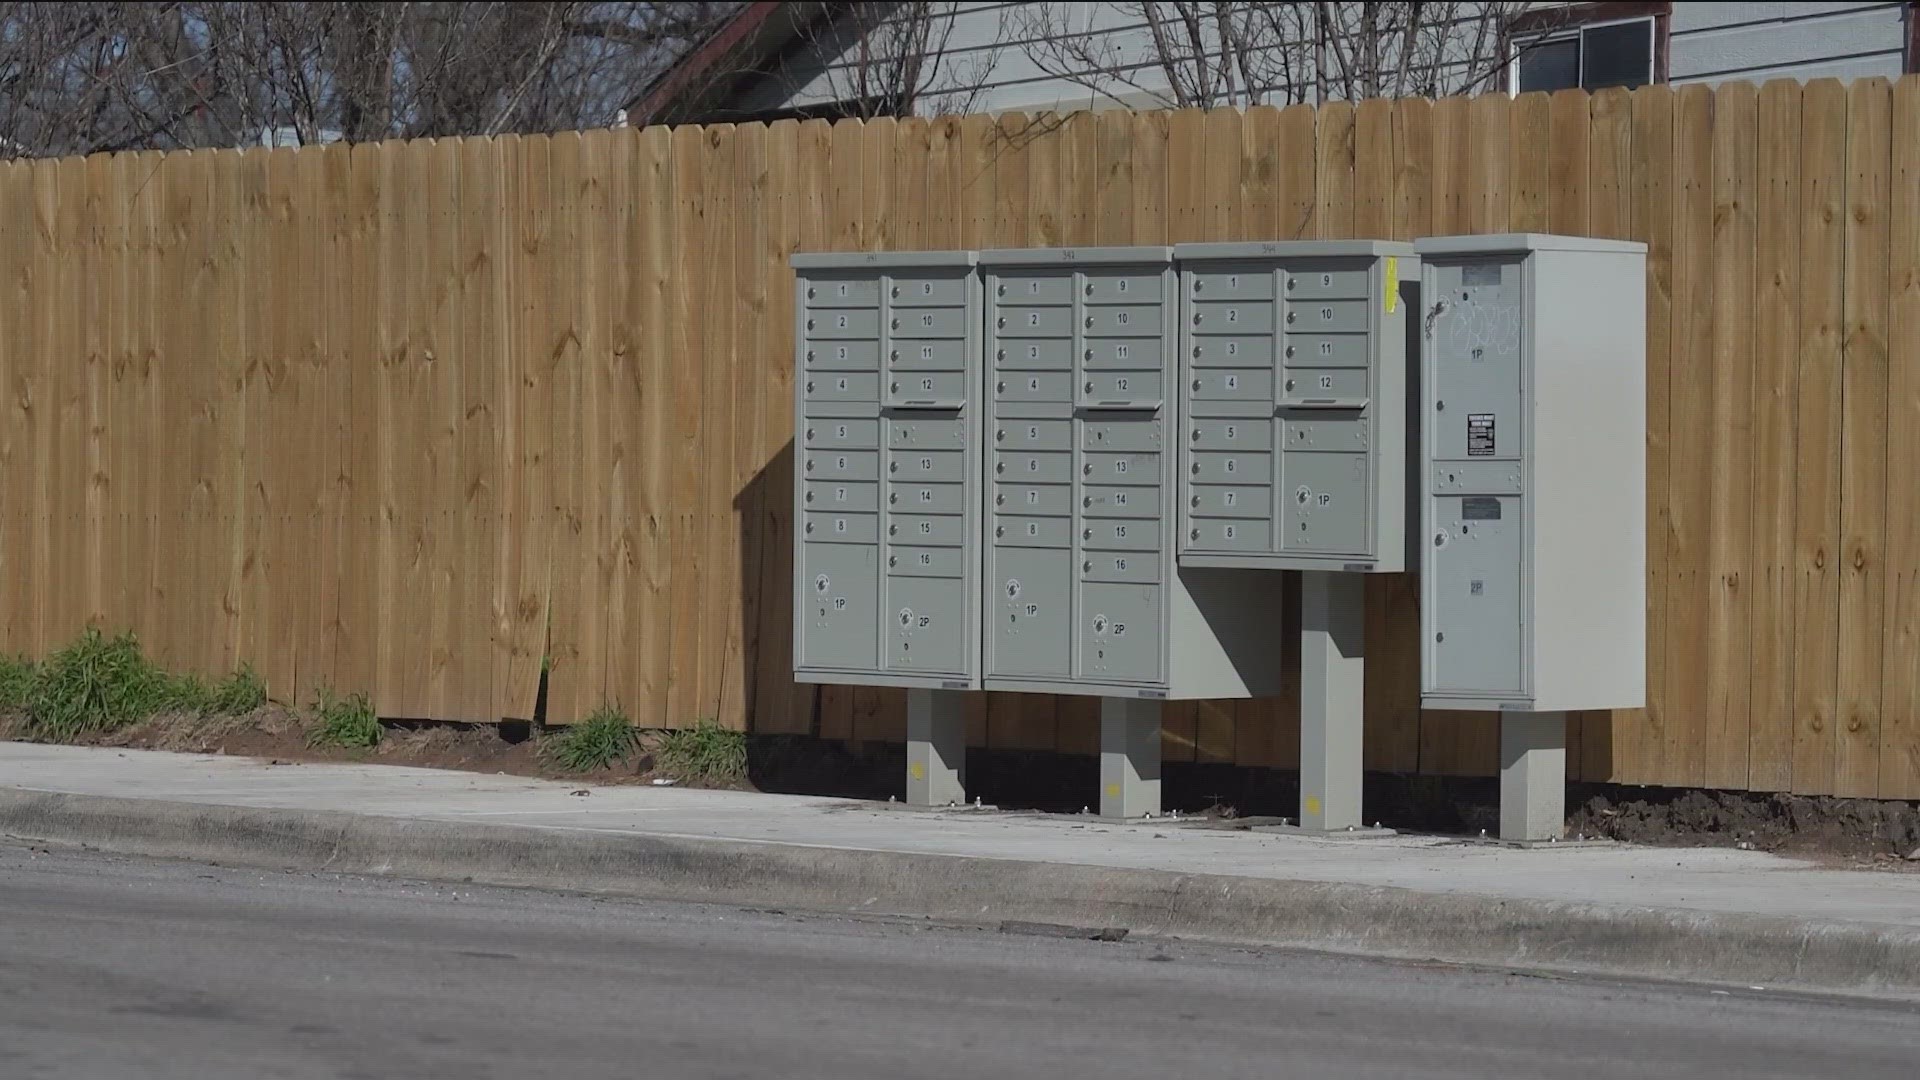 Some say they feel as though they must take matters into their own hands after a string of mail thefts across the state.